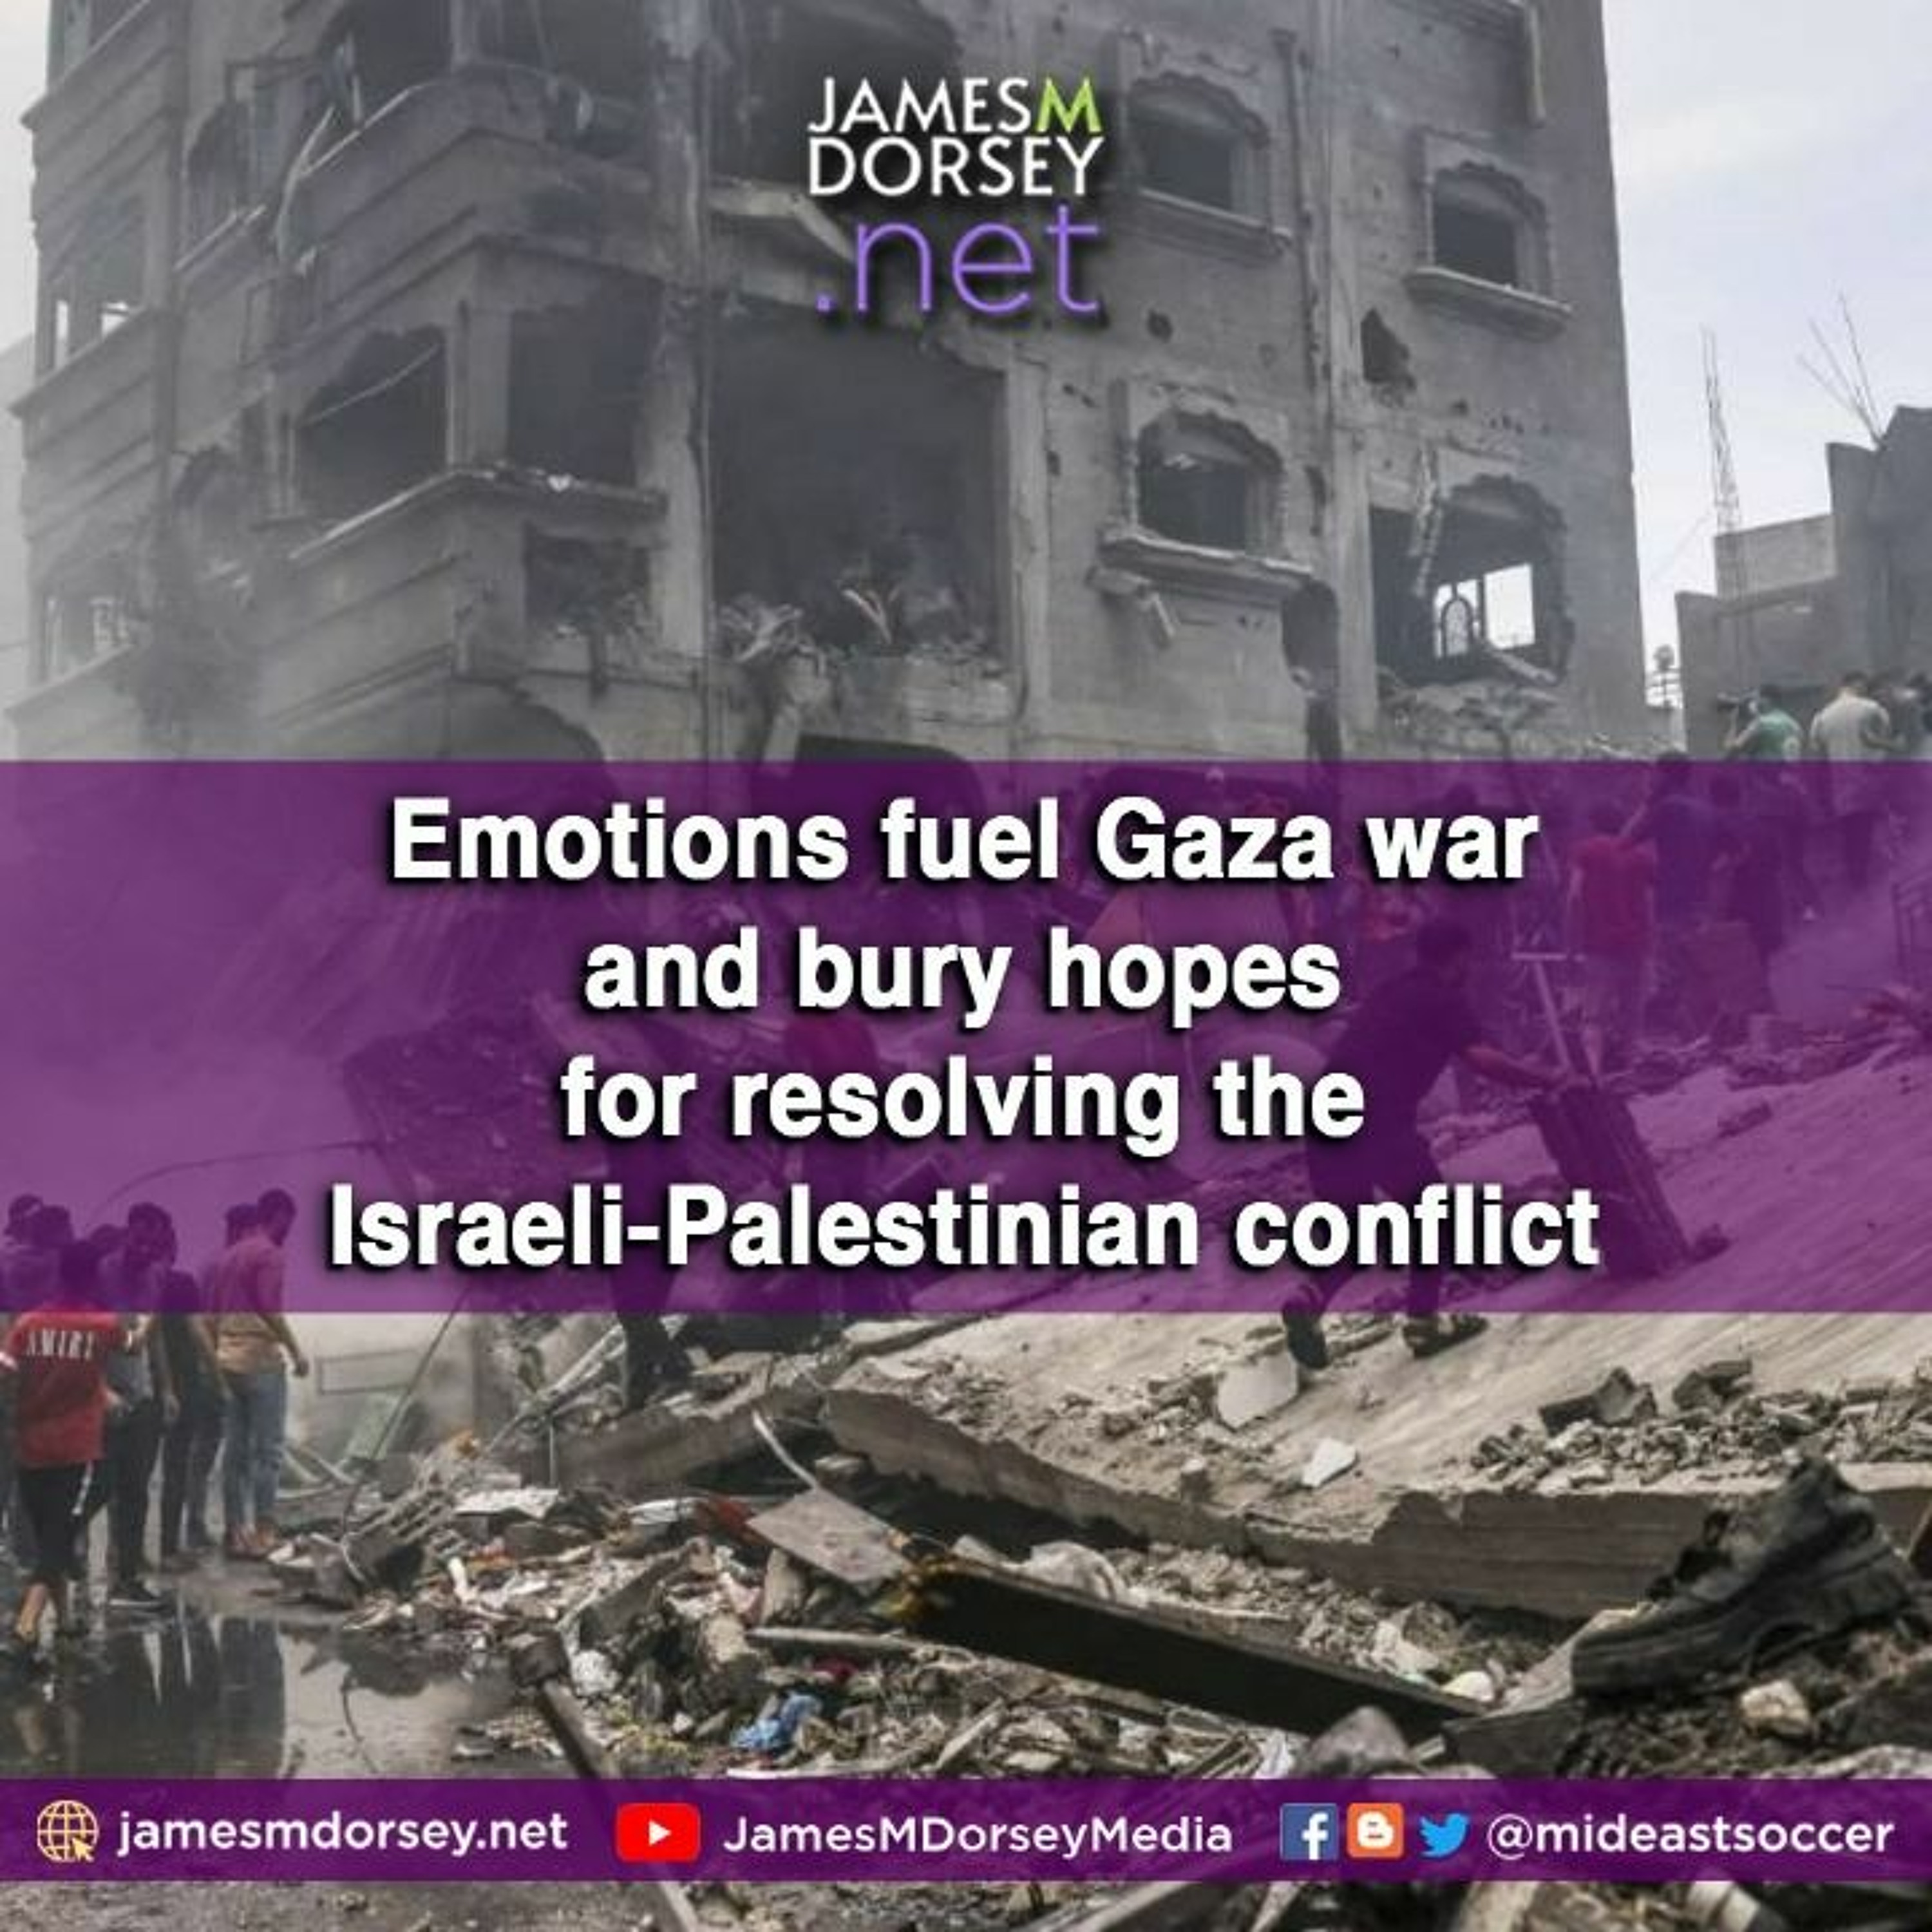 Emotions Fuel Gaza War And Bury Hopes For Resolving The Israeli - Palestinian Conflict